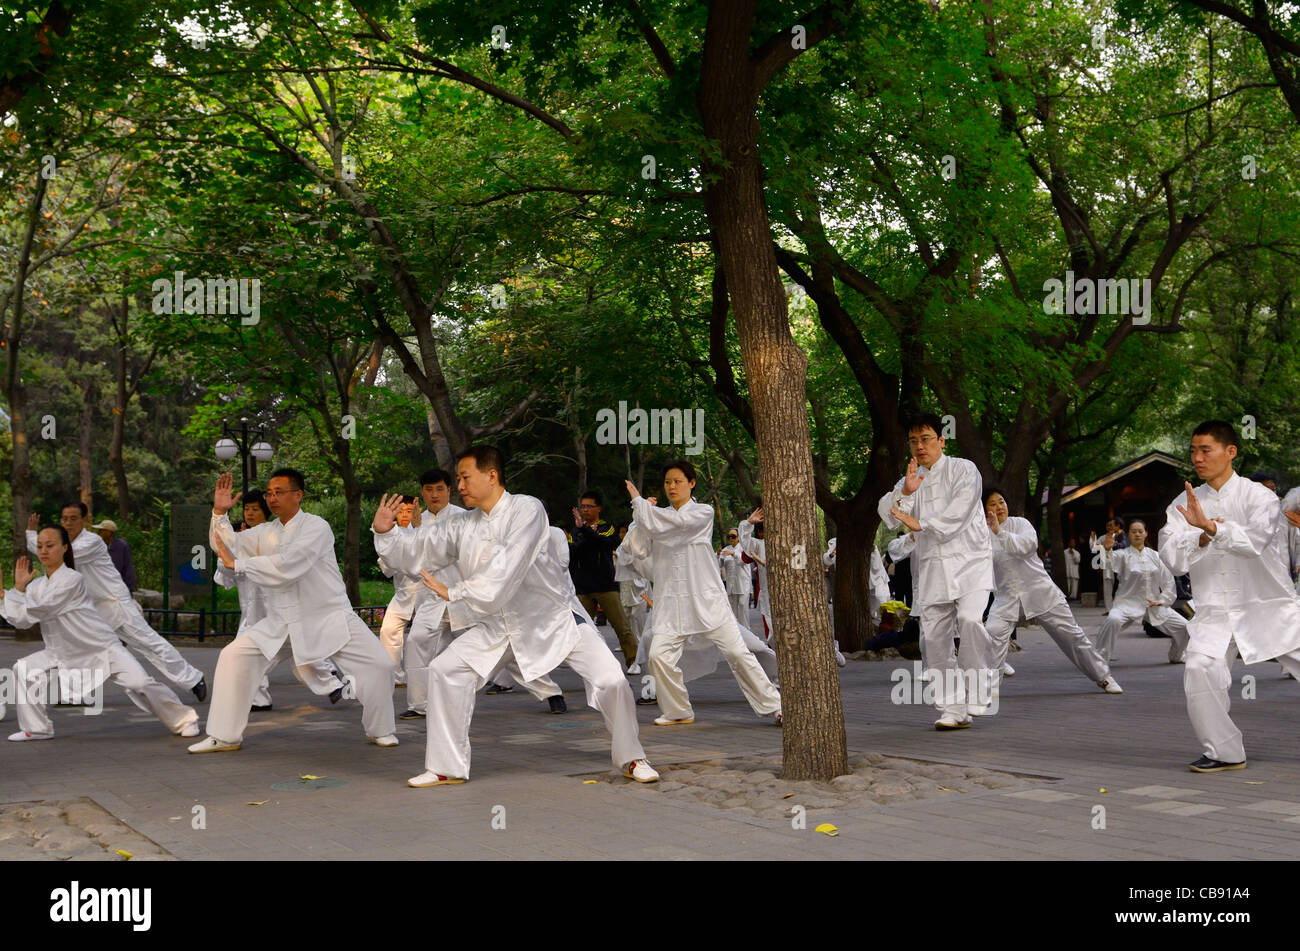 Morning Tai Chi exercises under trees in Zizhuyuan Purple Bamboo Park in Beijing on National holiday Peoples Republic of China Stock Photo